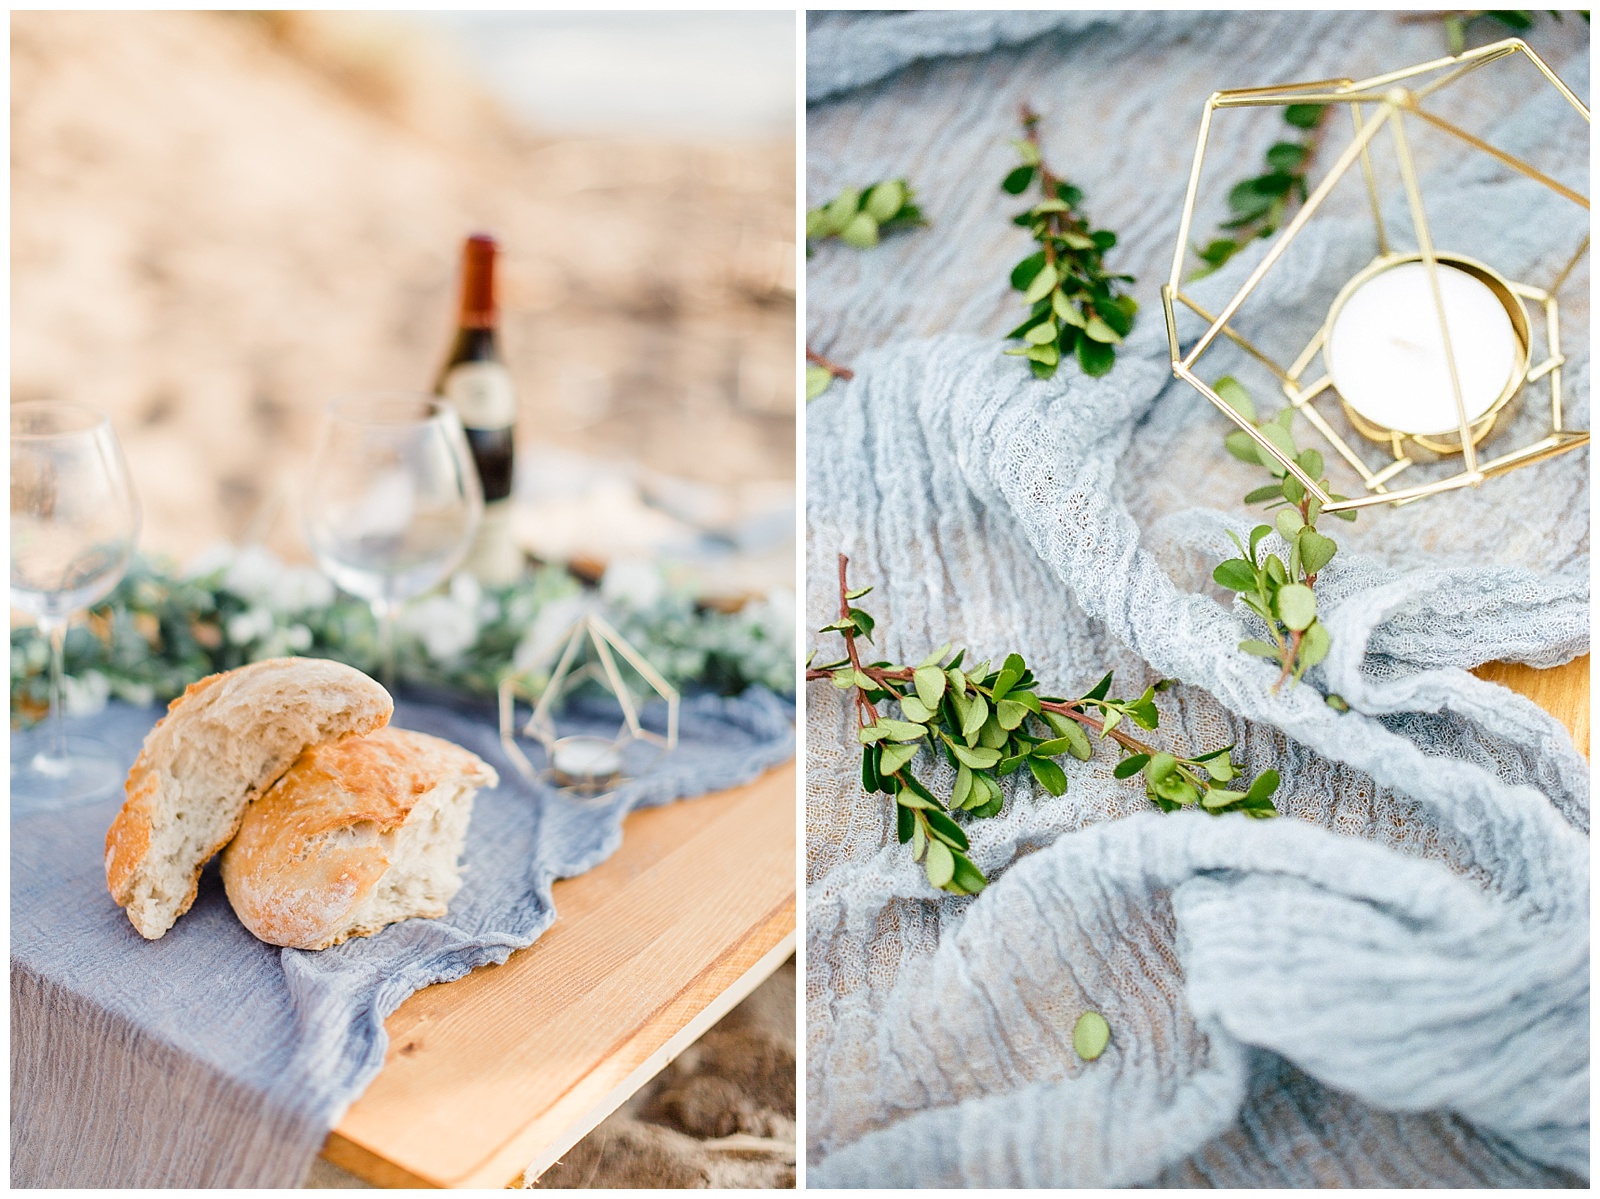 Dusty blue table details during Northern Michigan beach wedding in Traverse City, Michigan.